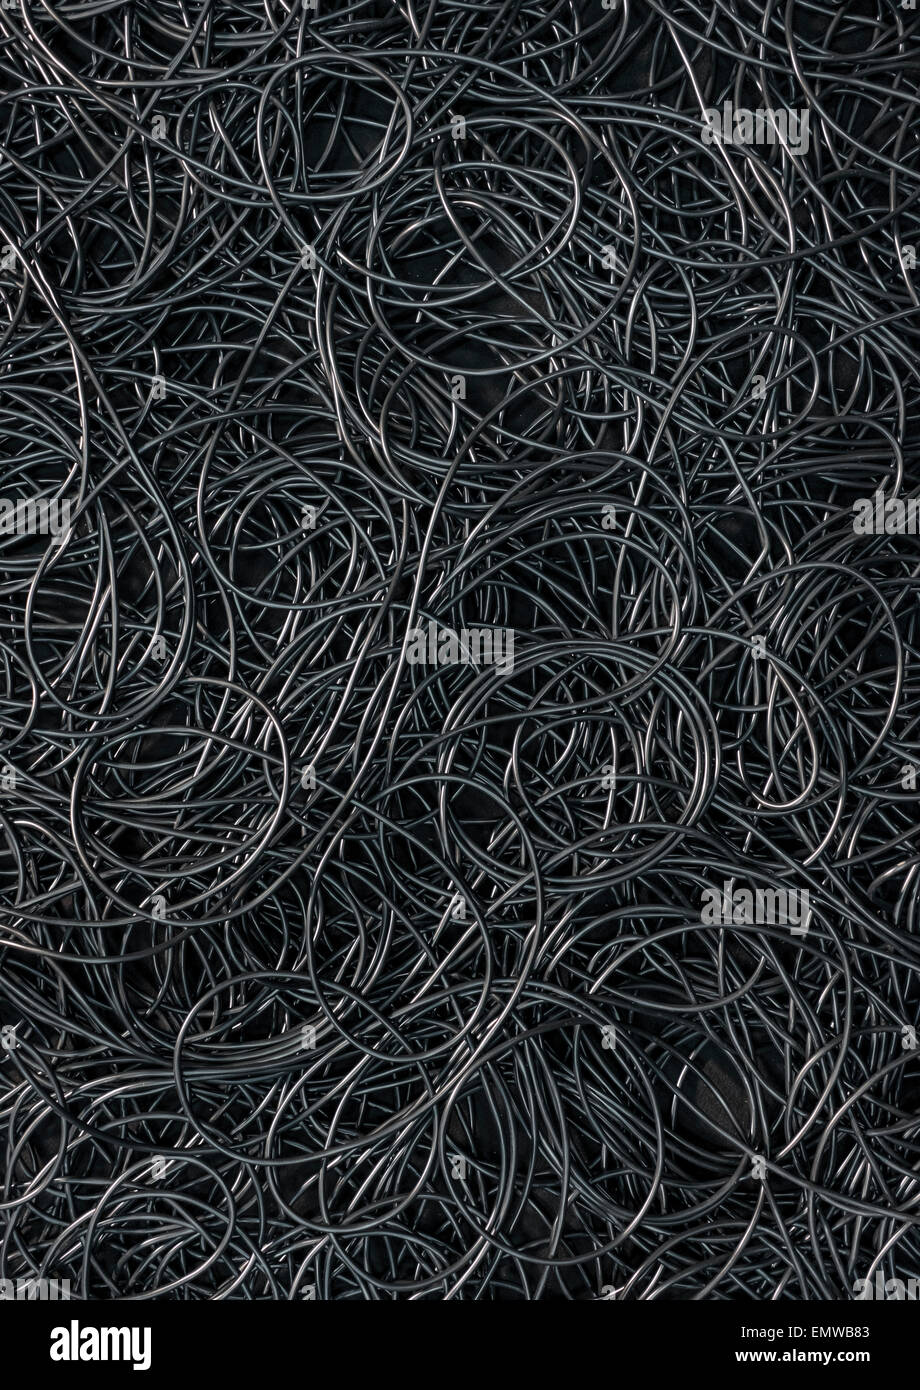 Background covered with a pile of electric cords filling the entire frame Stock Photo